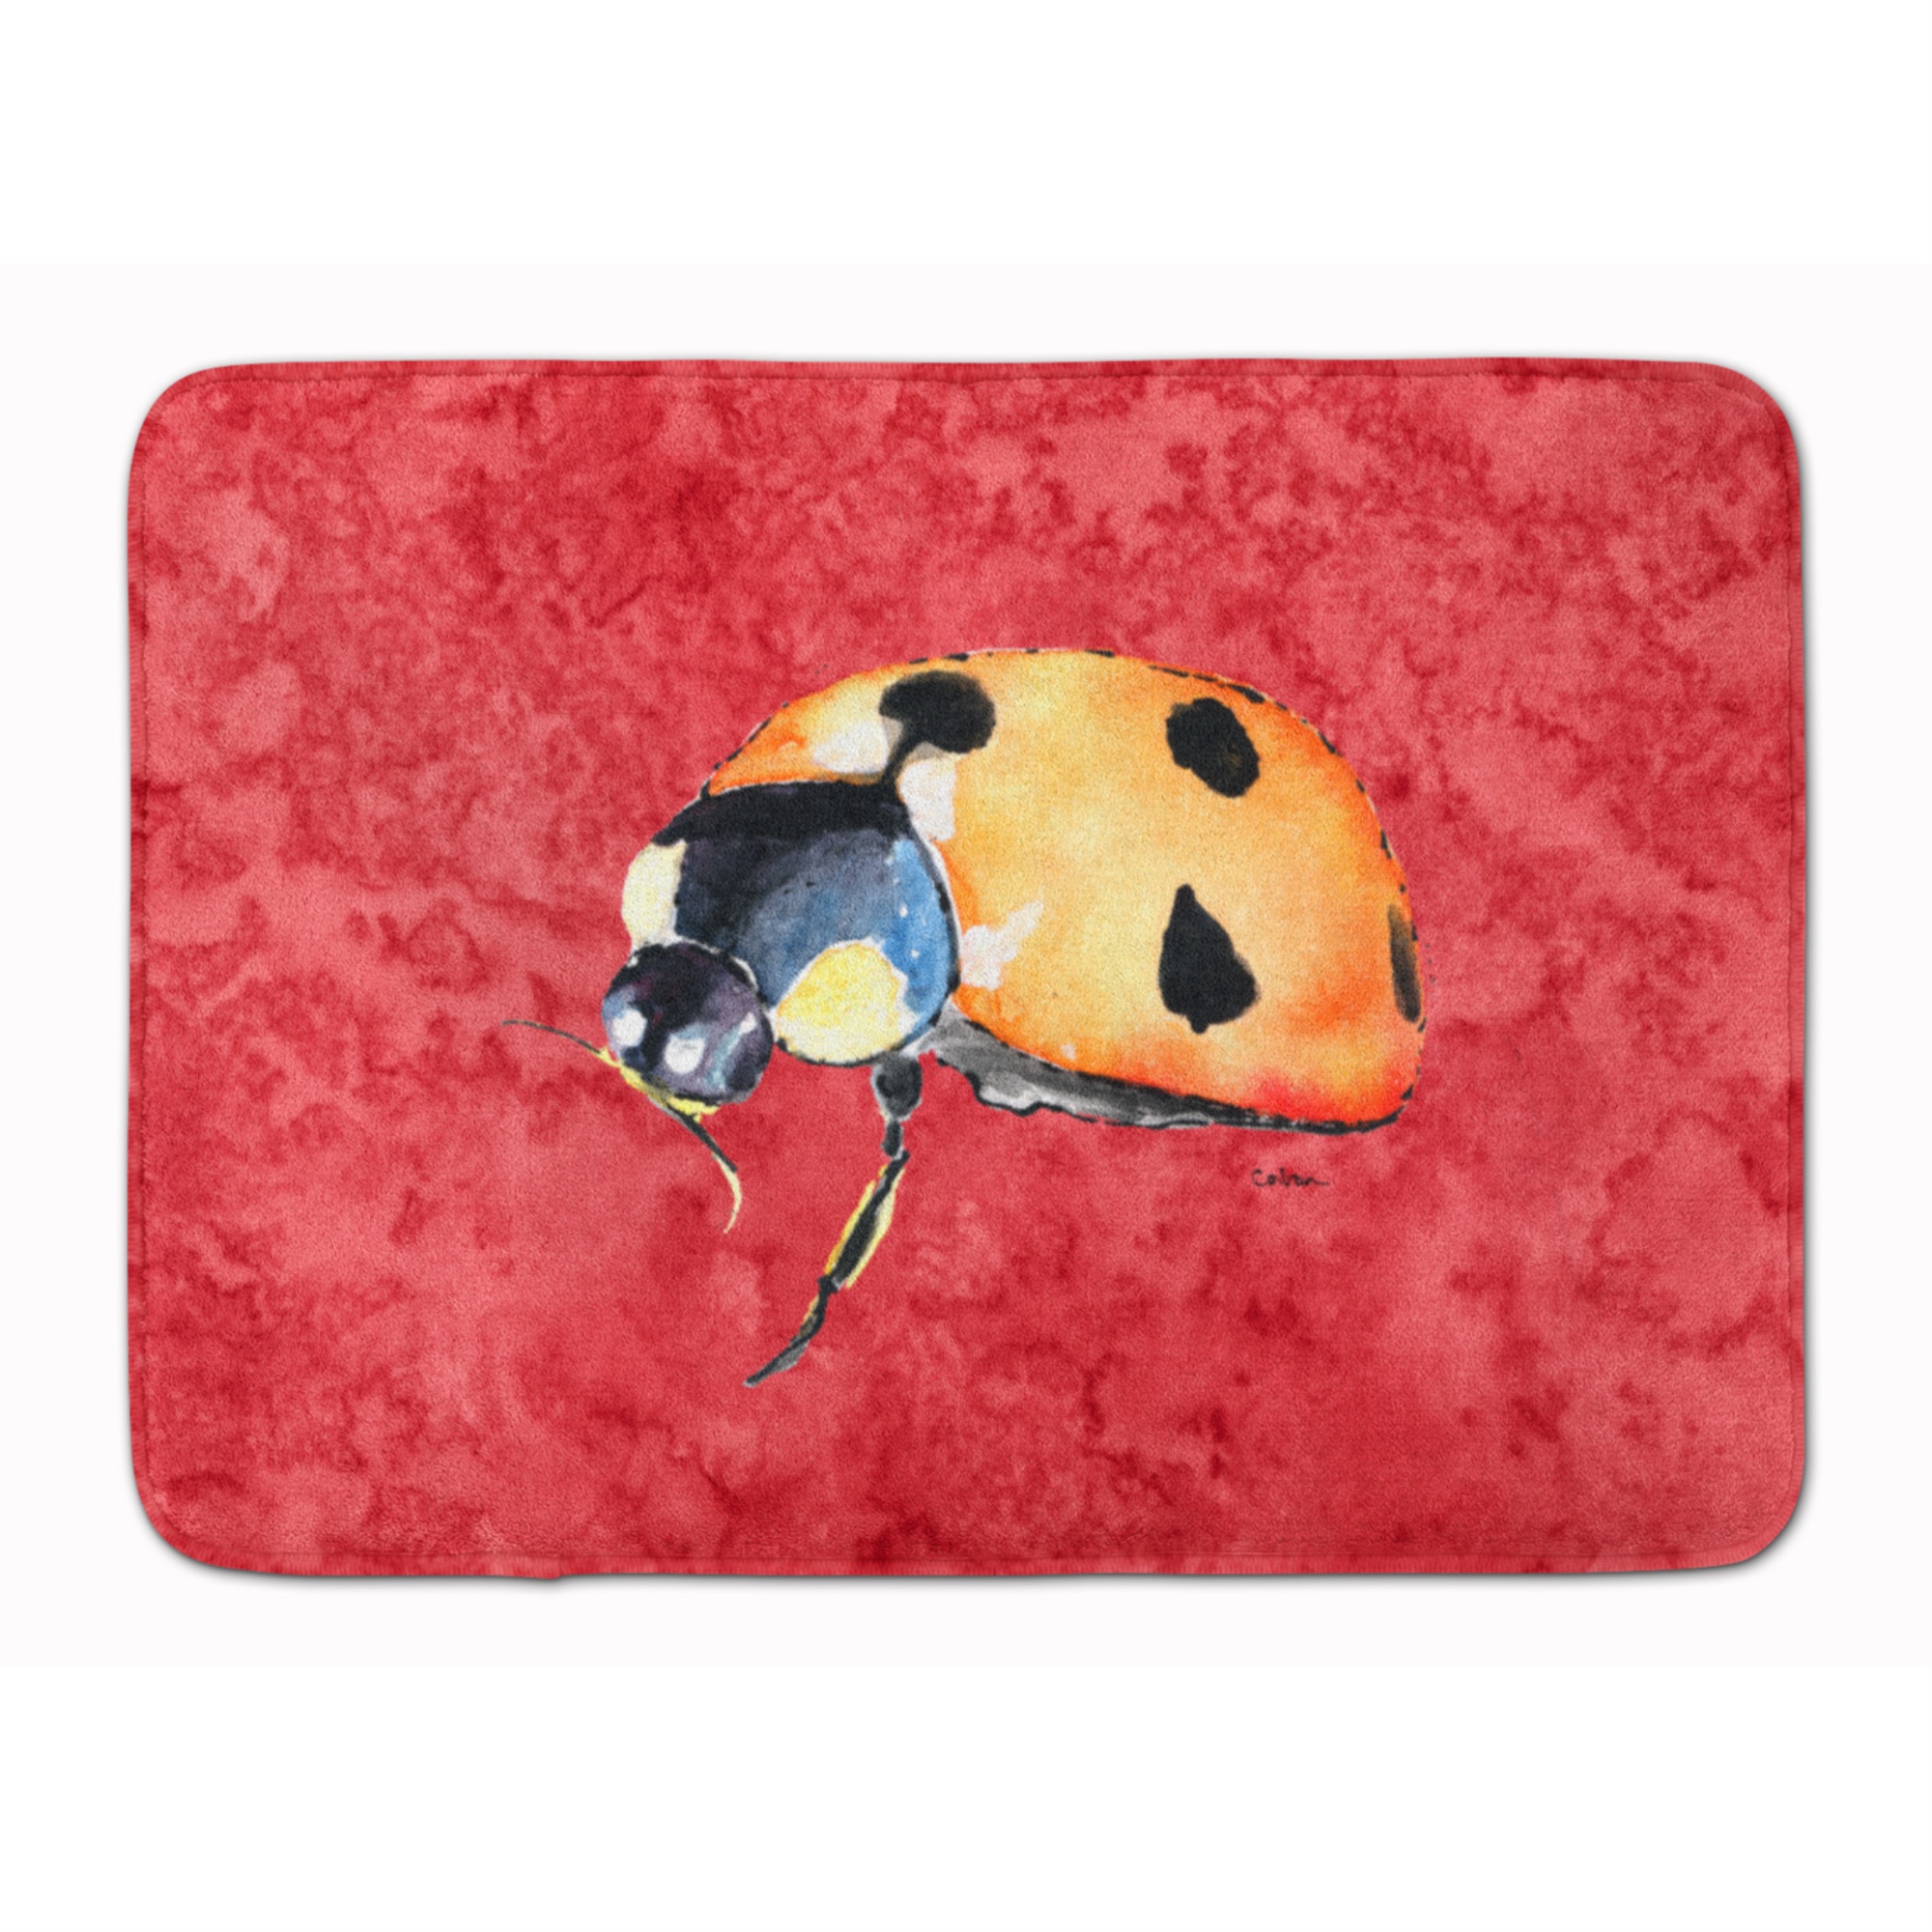 Caroline's Treasures "Caroline's Treasures Lady Bug on Red Floor Mat, 19"" x 27"", Multicolor"